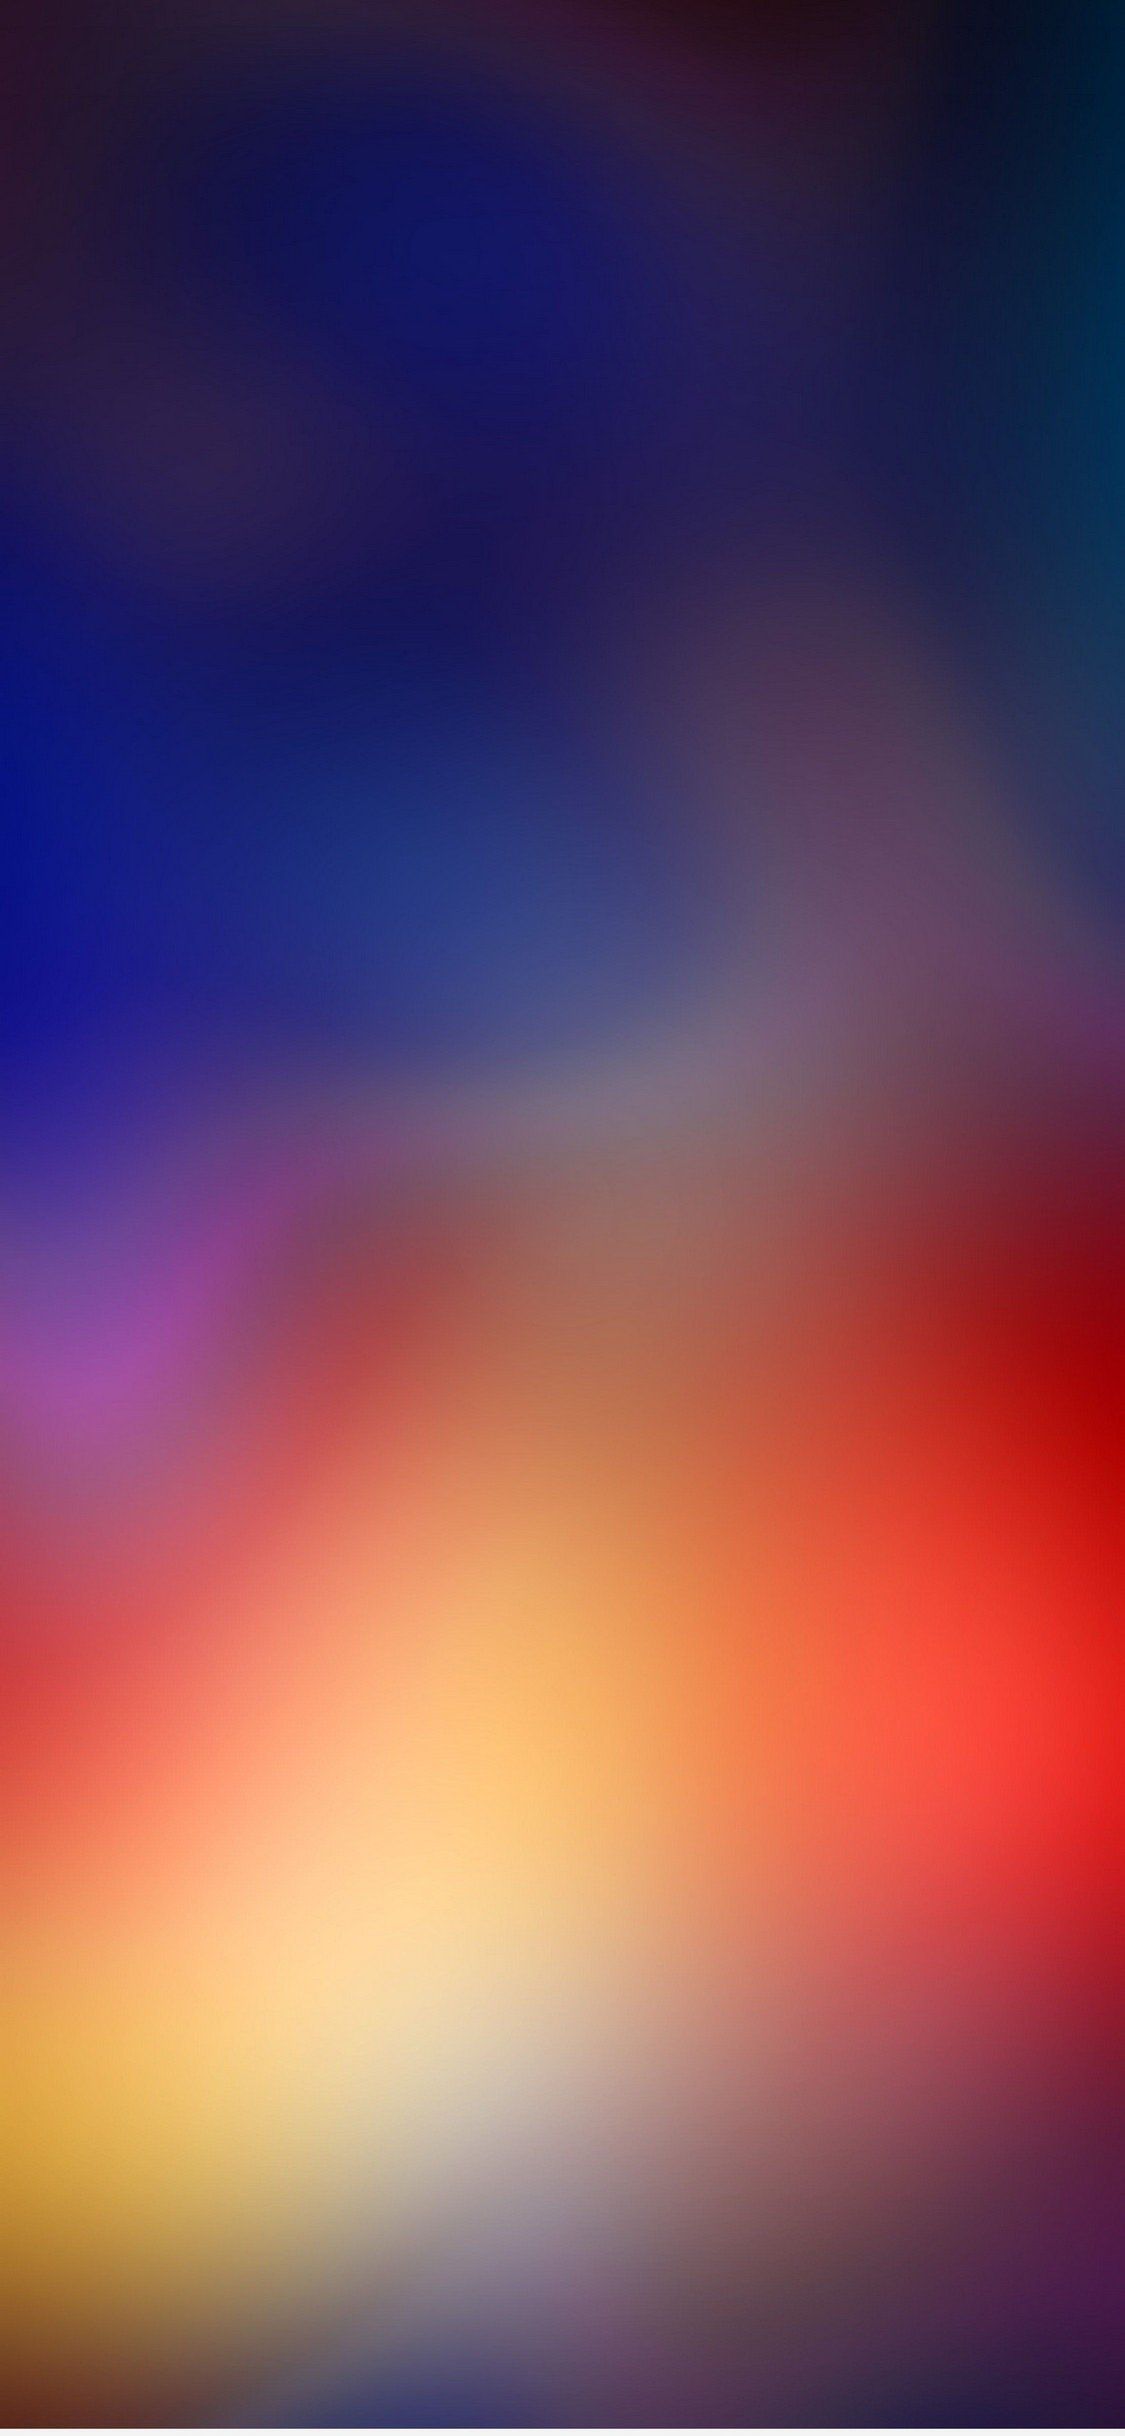 HD Apple iPhone Wallpapers - Wallpaper Cave